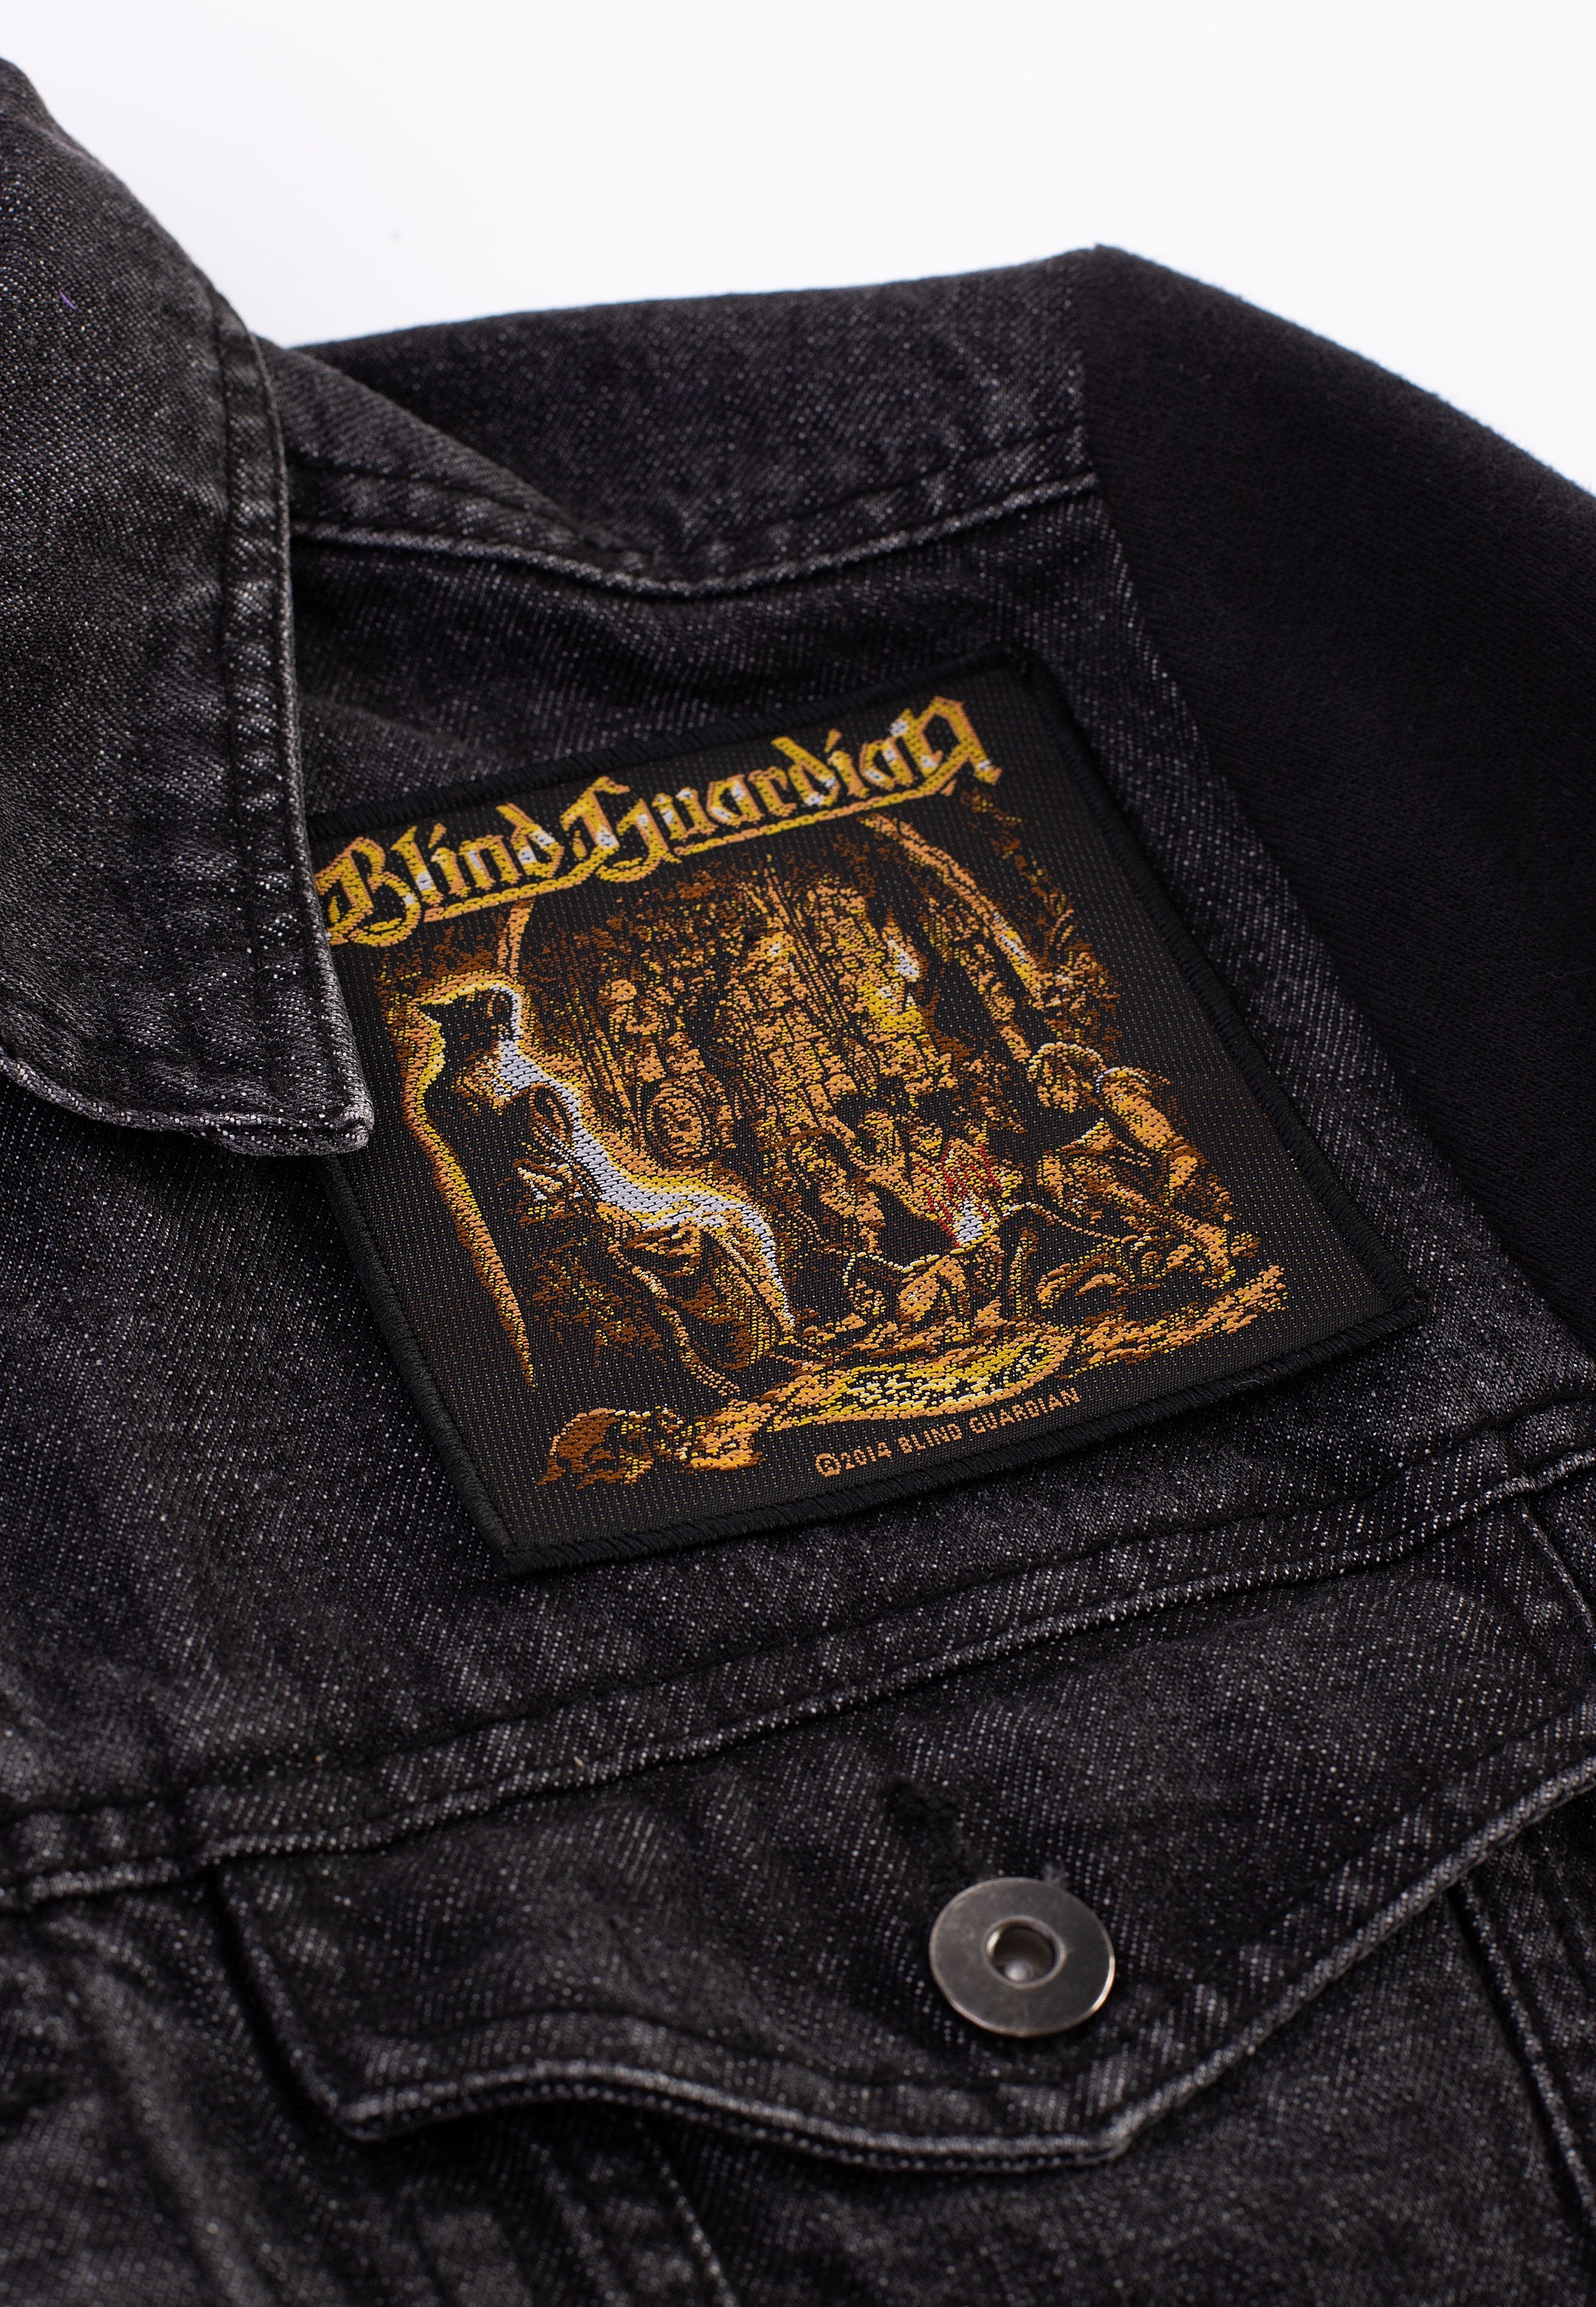 Blind Guardian - Tales From The Twilight - Patch